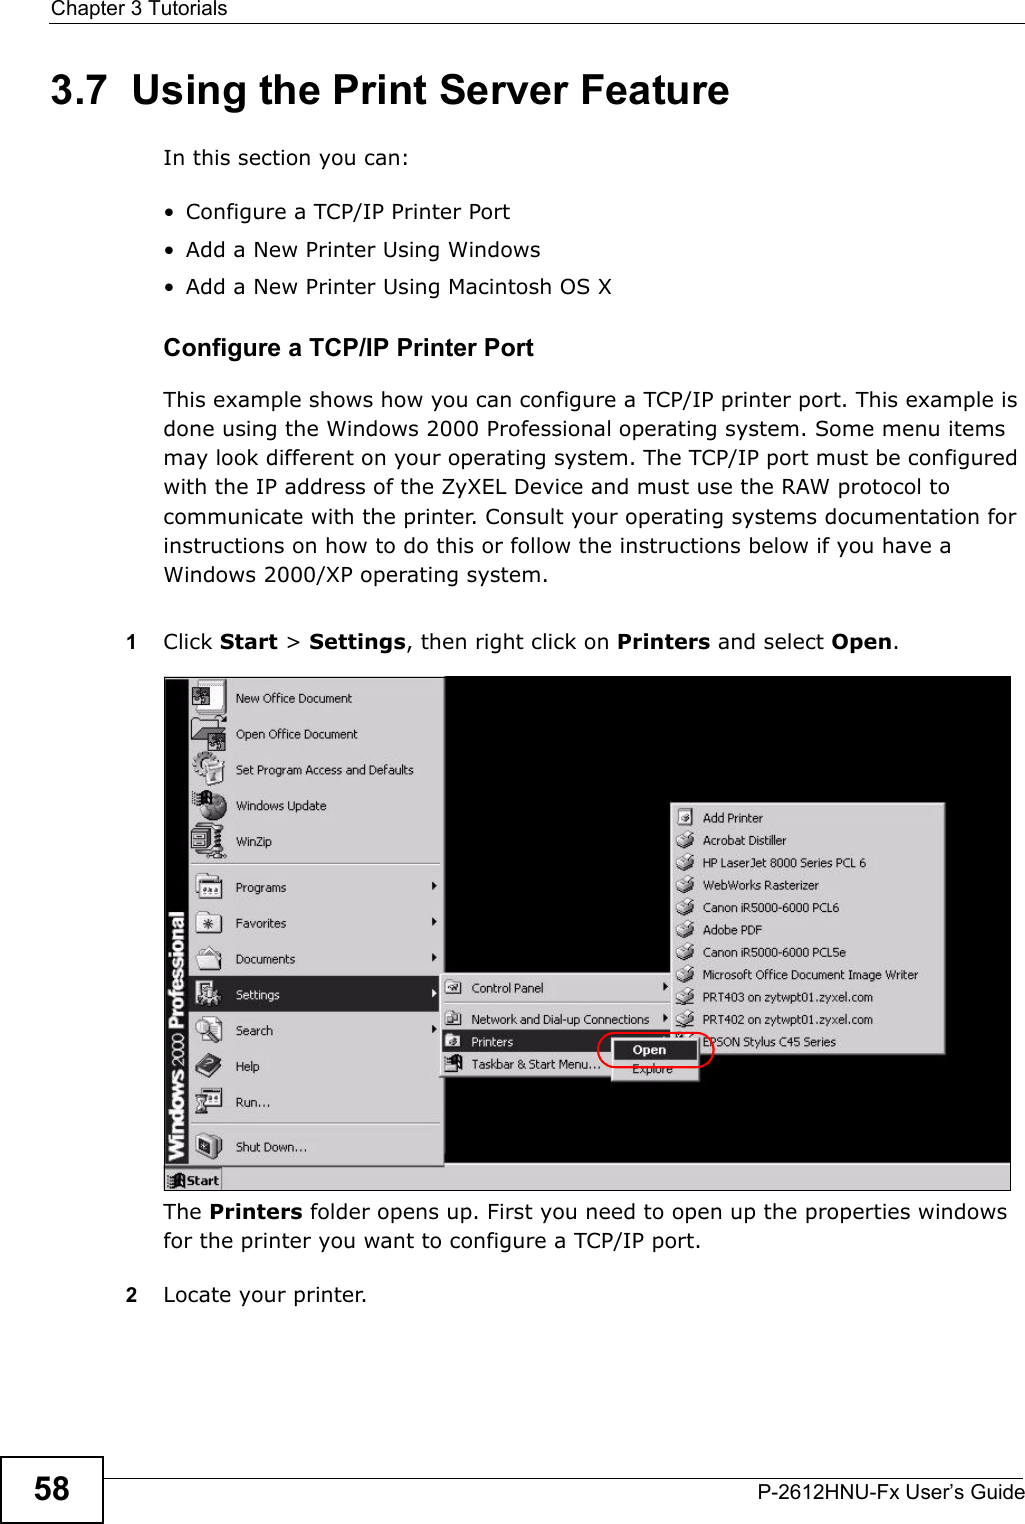 Chapter 3 TutorialsP-2612HNU-Fx User’s Guide583.7  Using the Print Server FeatureIn this section you can:• Configure a TCP/IP Printer Port• Add a New Printer Using Windows• Add a New Printer Using Macintosh OS XConfigure a TCP/IP Printer PortThis example shows how you can configure a TCP/IP printer port. This example is done using the Windows 2000 Professional operating system. Some menu items may look different on your operating system. The TCP/IP port must be configuredwith the IP address of the ZyXEL Device and must use the RAW protocol to communicate with the printer. Consult your operating systems documentation for instructions on how to do this or follow the instructions below if you have aWindows 2000/XP operating system.1Click Start &gt; Settings, then right click on Printers and select Open.Tutorial: Open Printers WindowThe Printers folder opens up. First you need to open up the properties windows for the printer you want to configure a TCP/IP port.2Locate your printer.